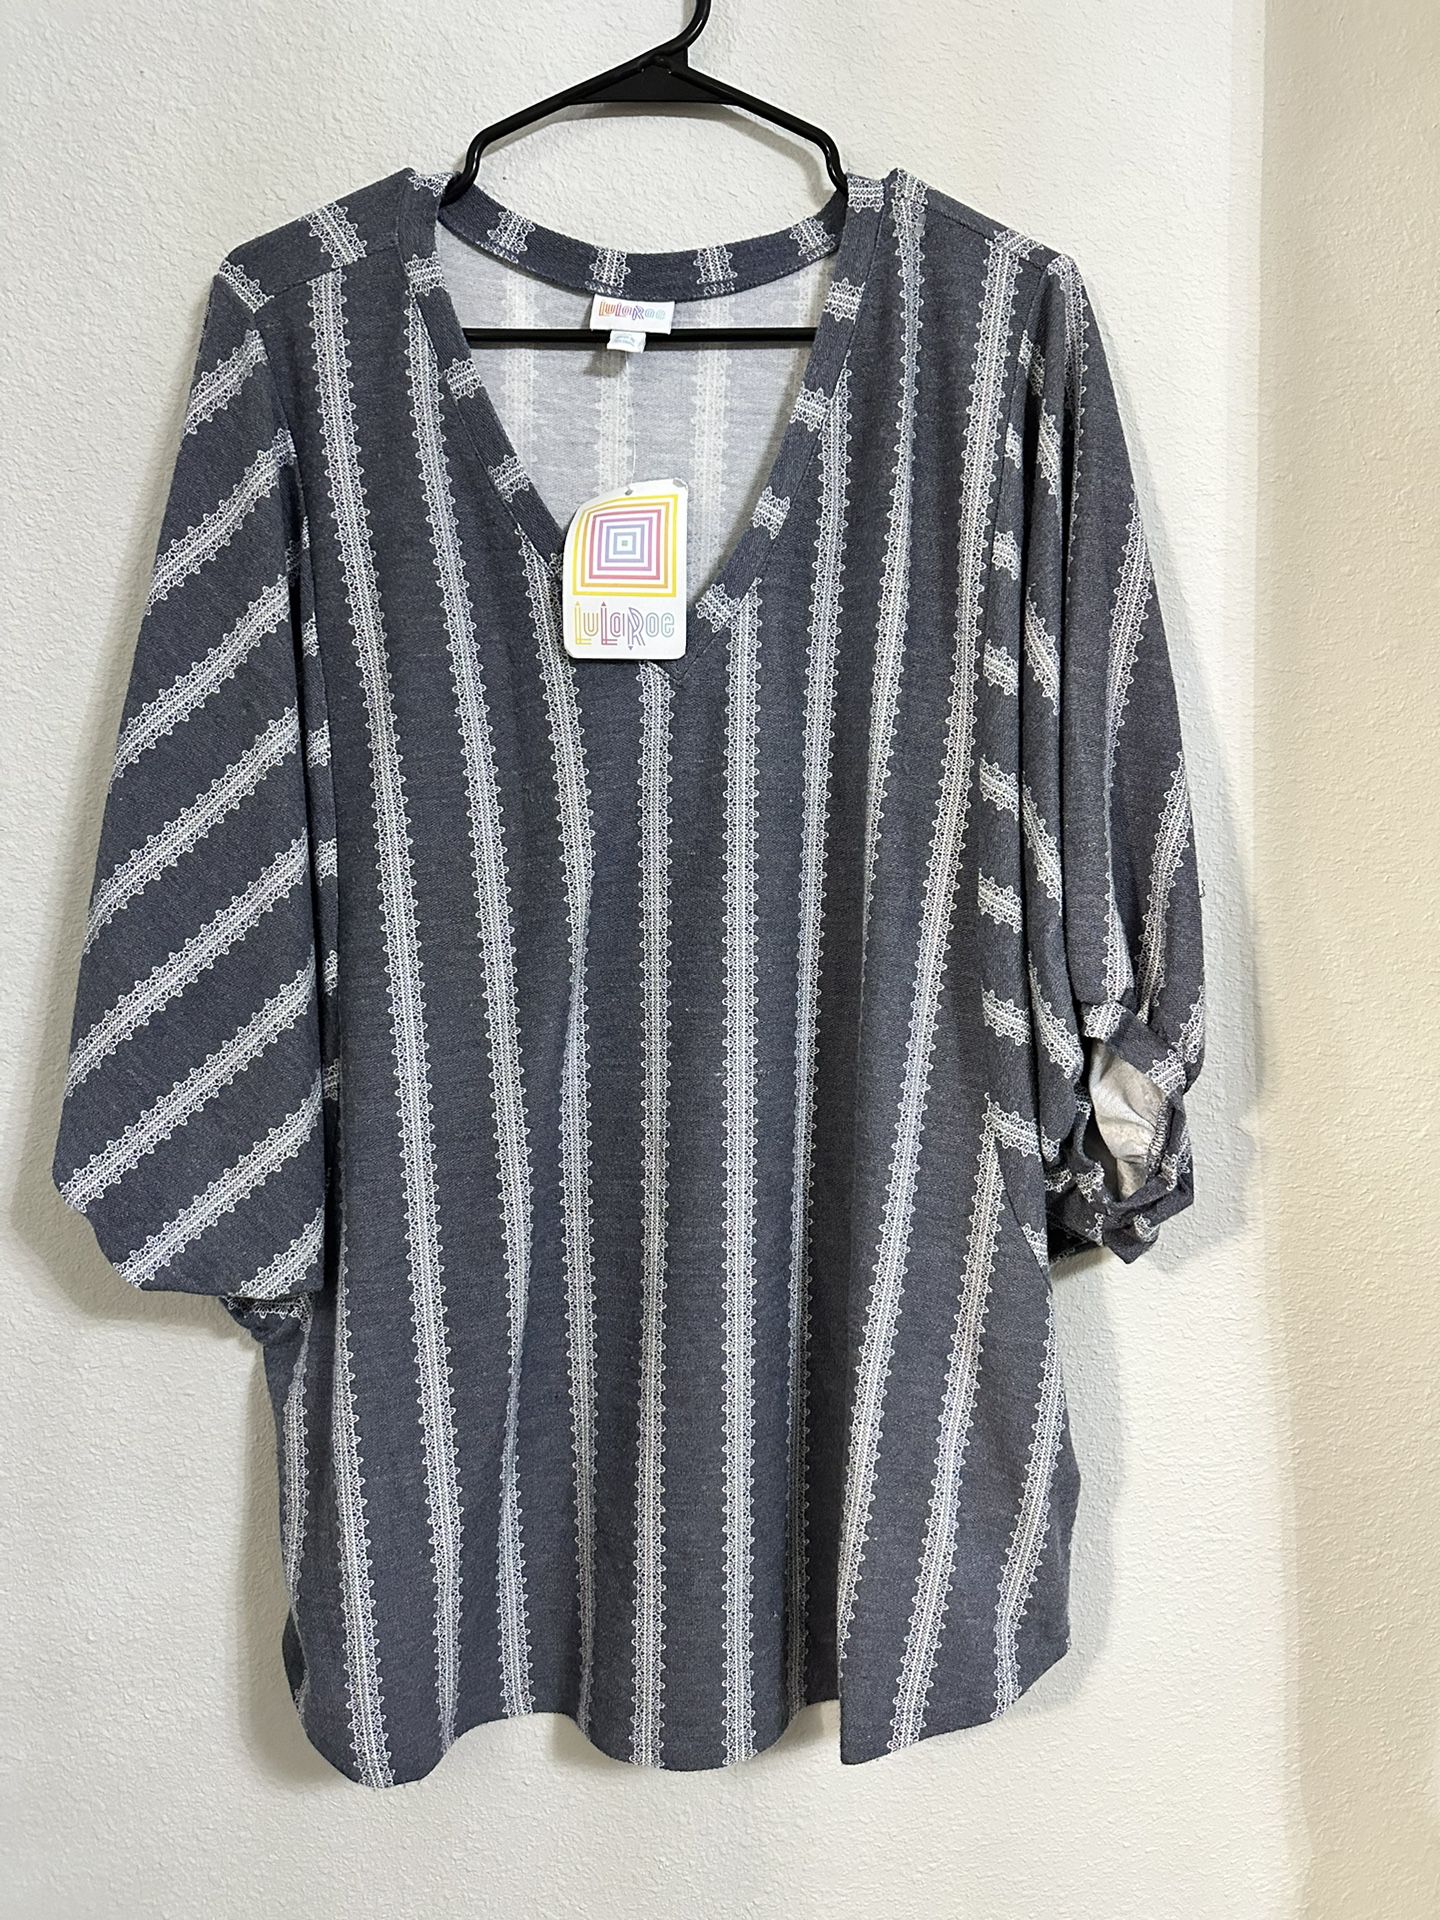 Lularoe Top $5 New With Tag 